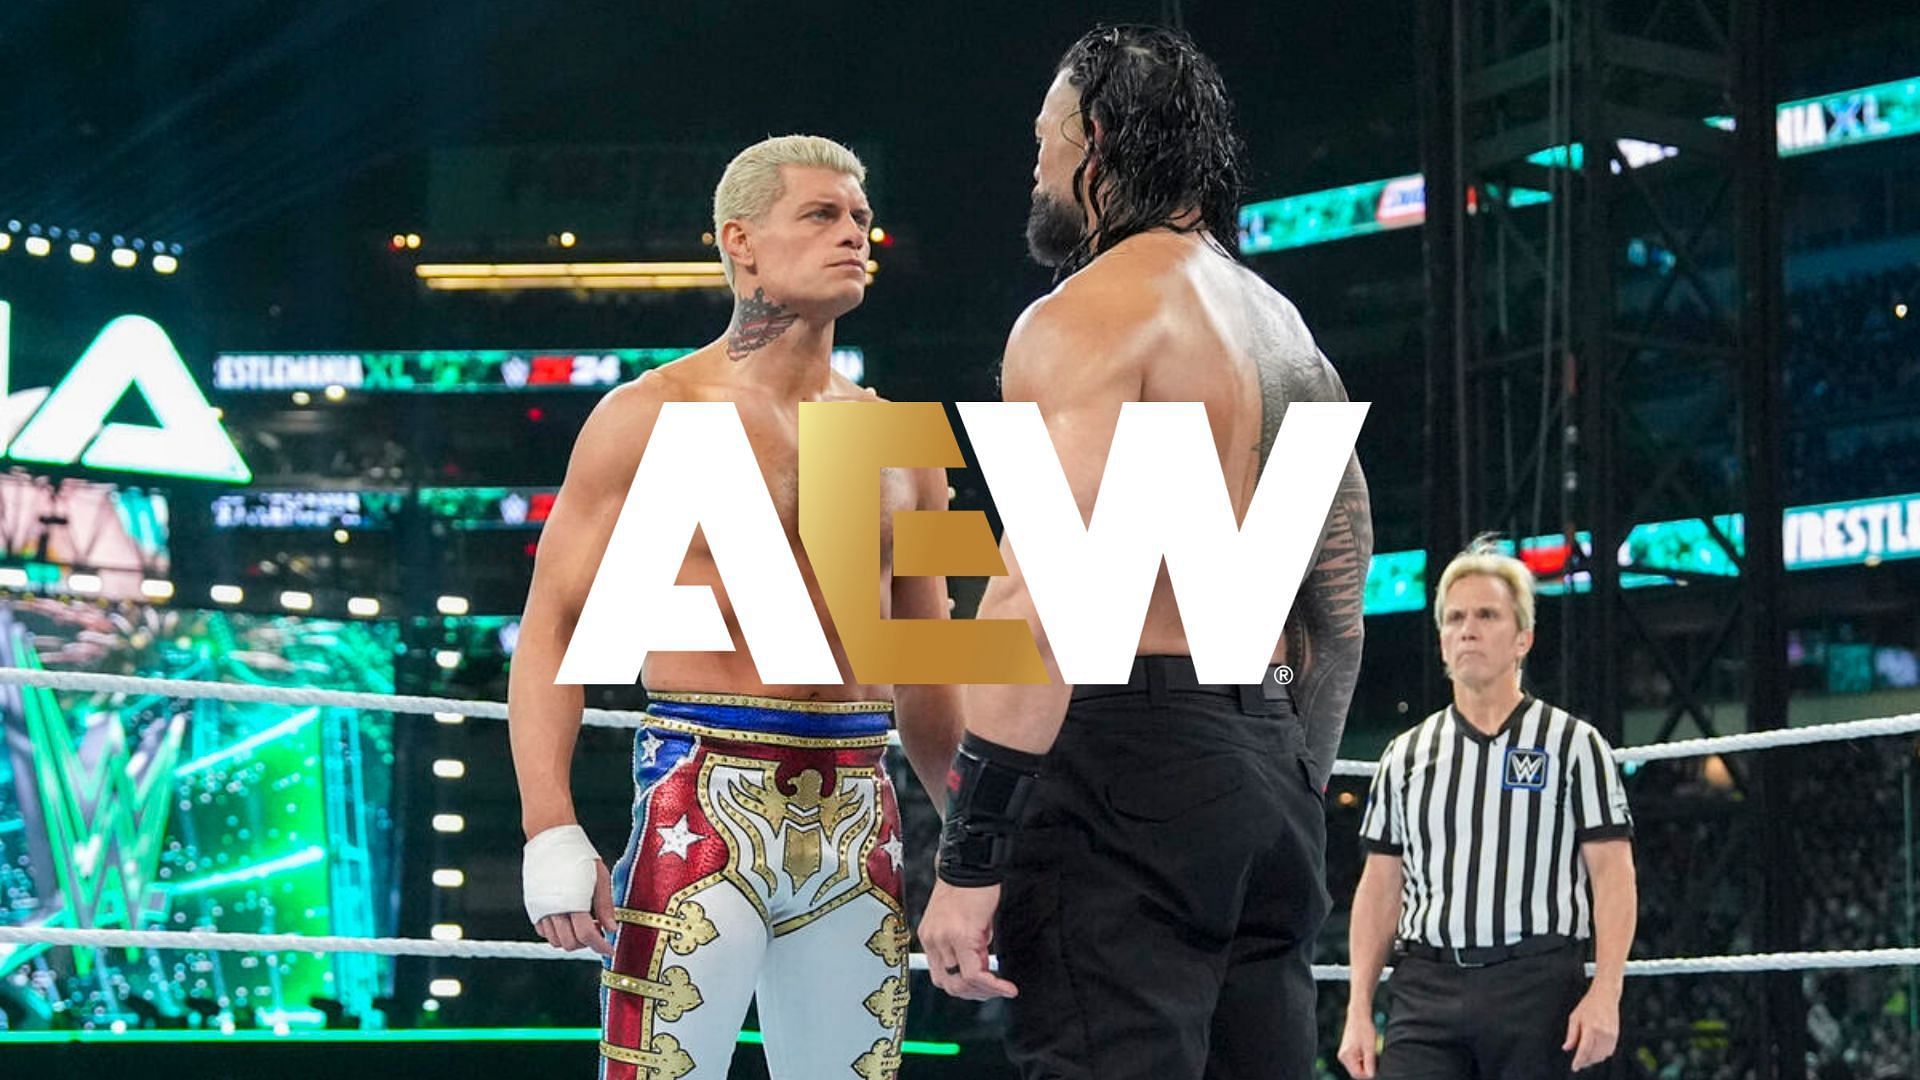 Cody Rhodes and Roman Reigns during an intense staredown.